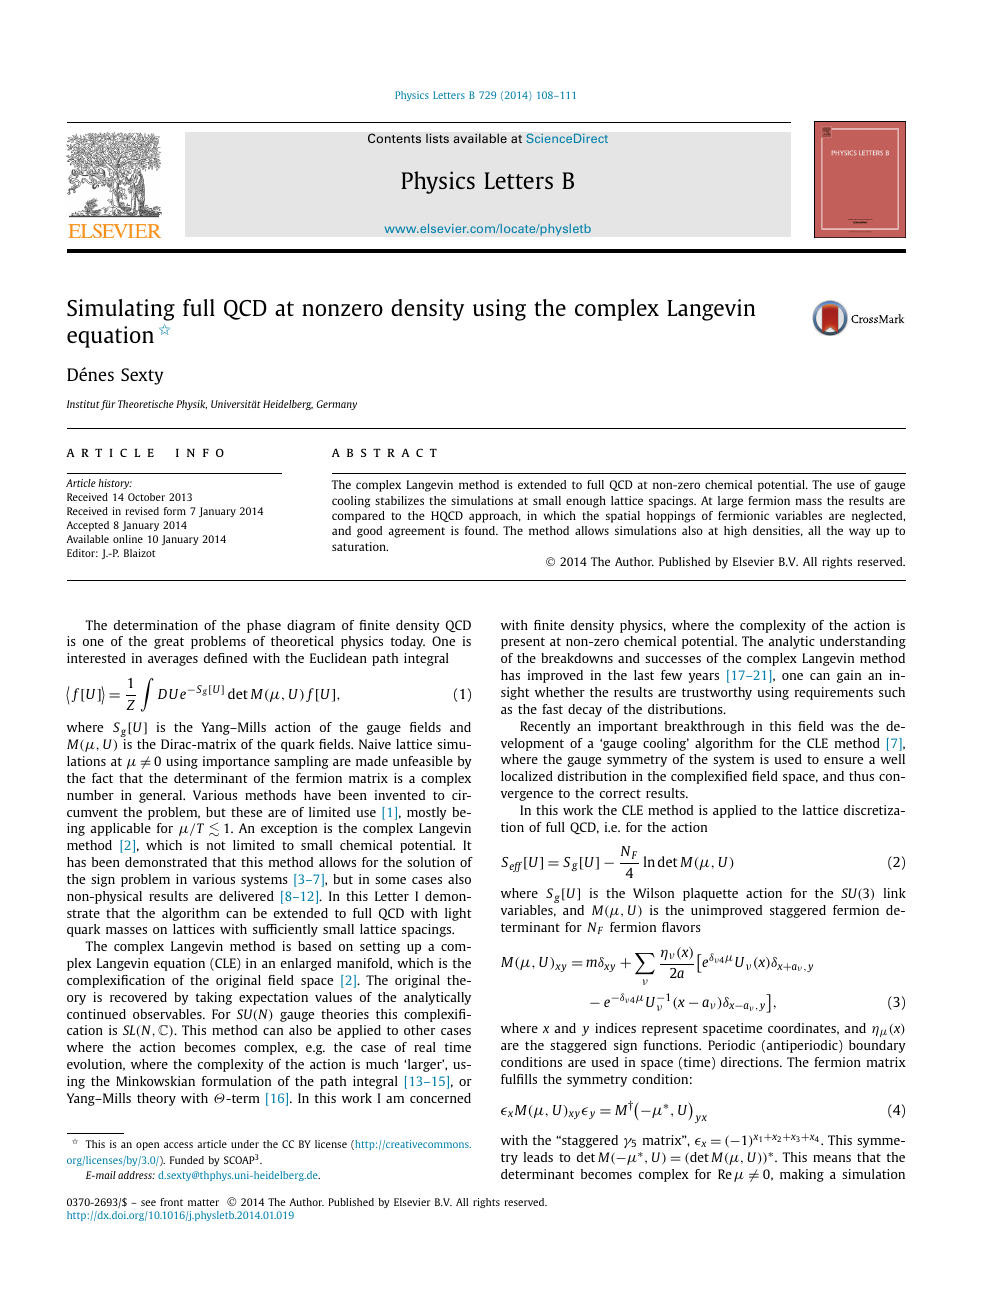 Simulating Full Qcd At Nonzero Density Using The Complex Langevin Equation Topic Of Research Paper In Physical Sciences Download Scholarly Article Pdf And Read For Free On Cyberleninka Open Science Hub